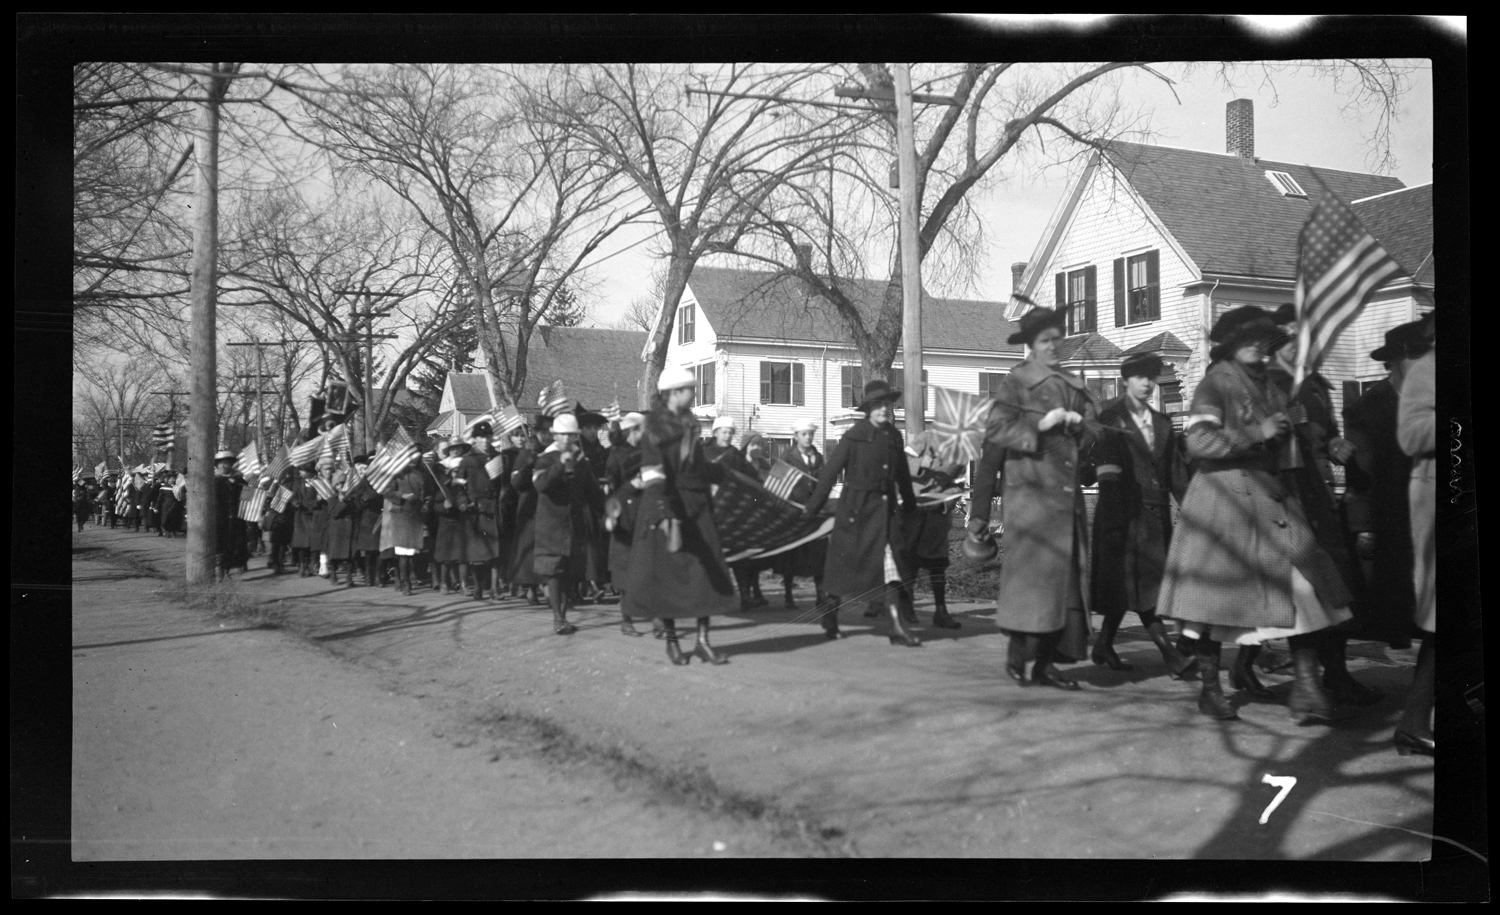 Marchers in the Welcome Home parade, October 18, 1919.